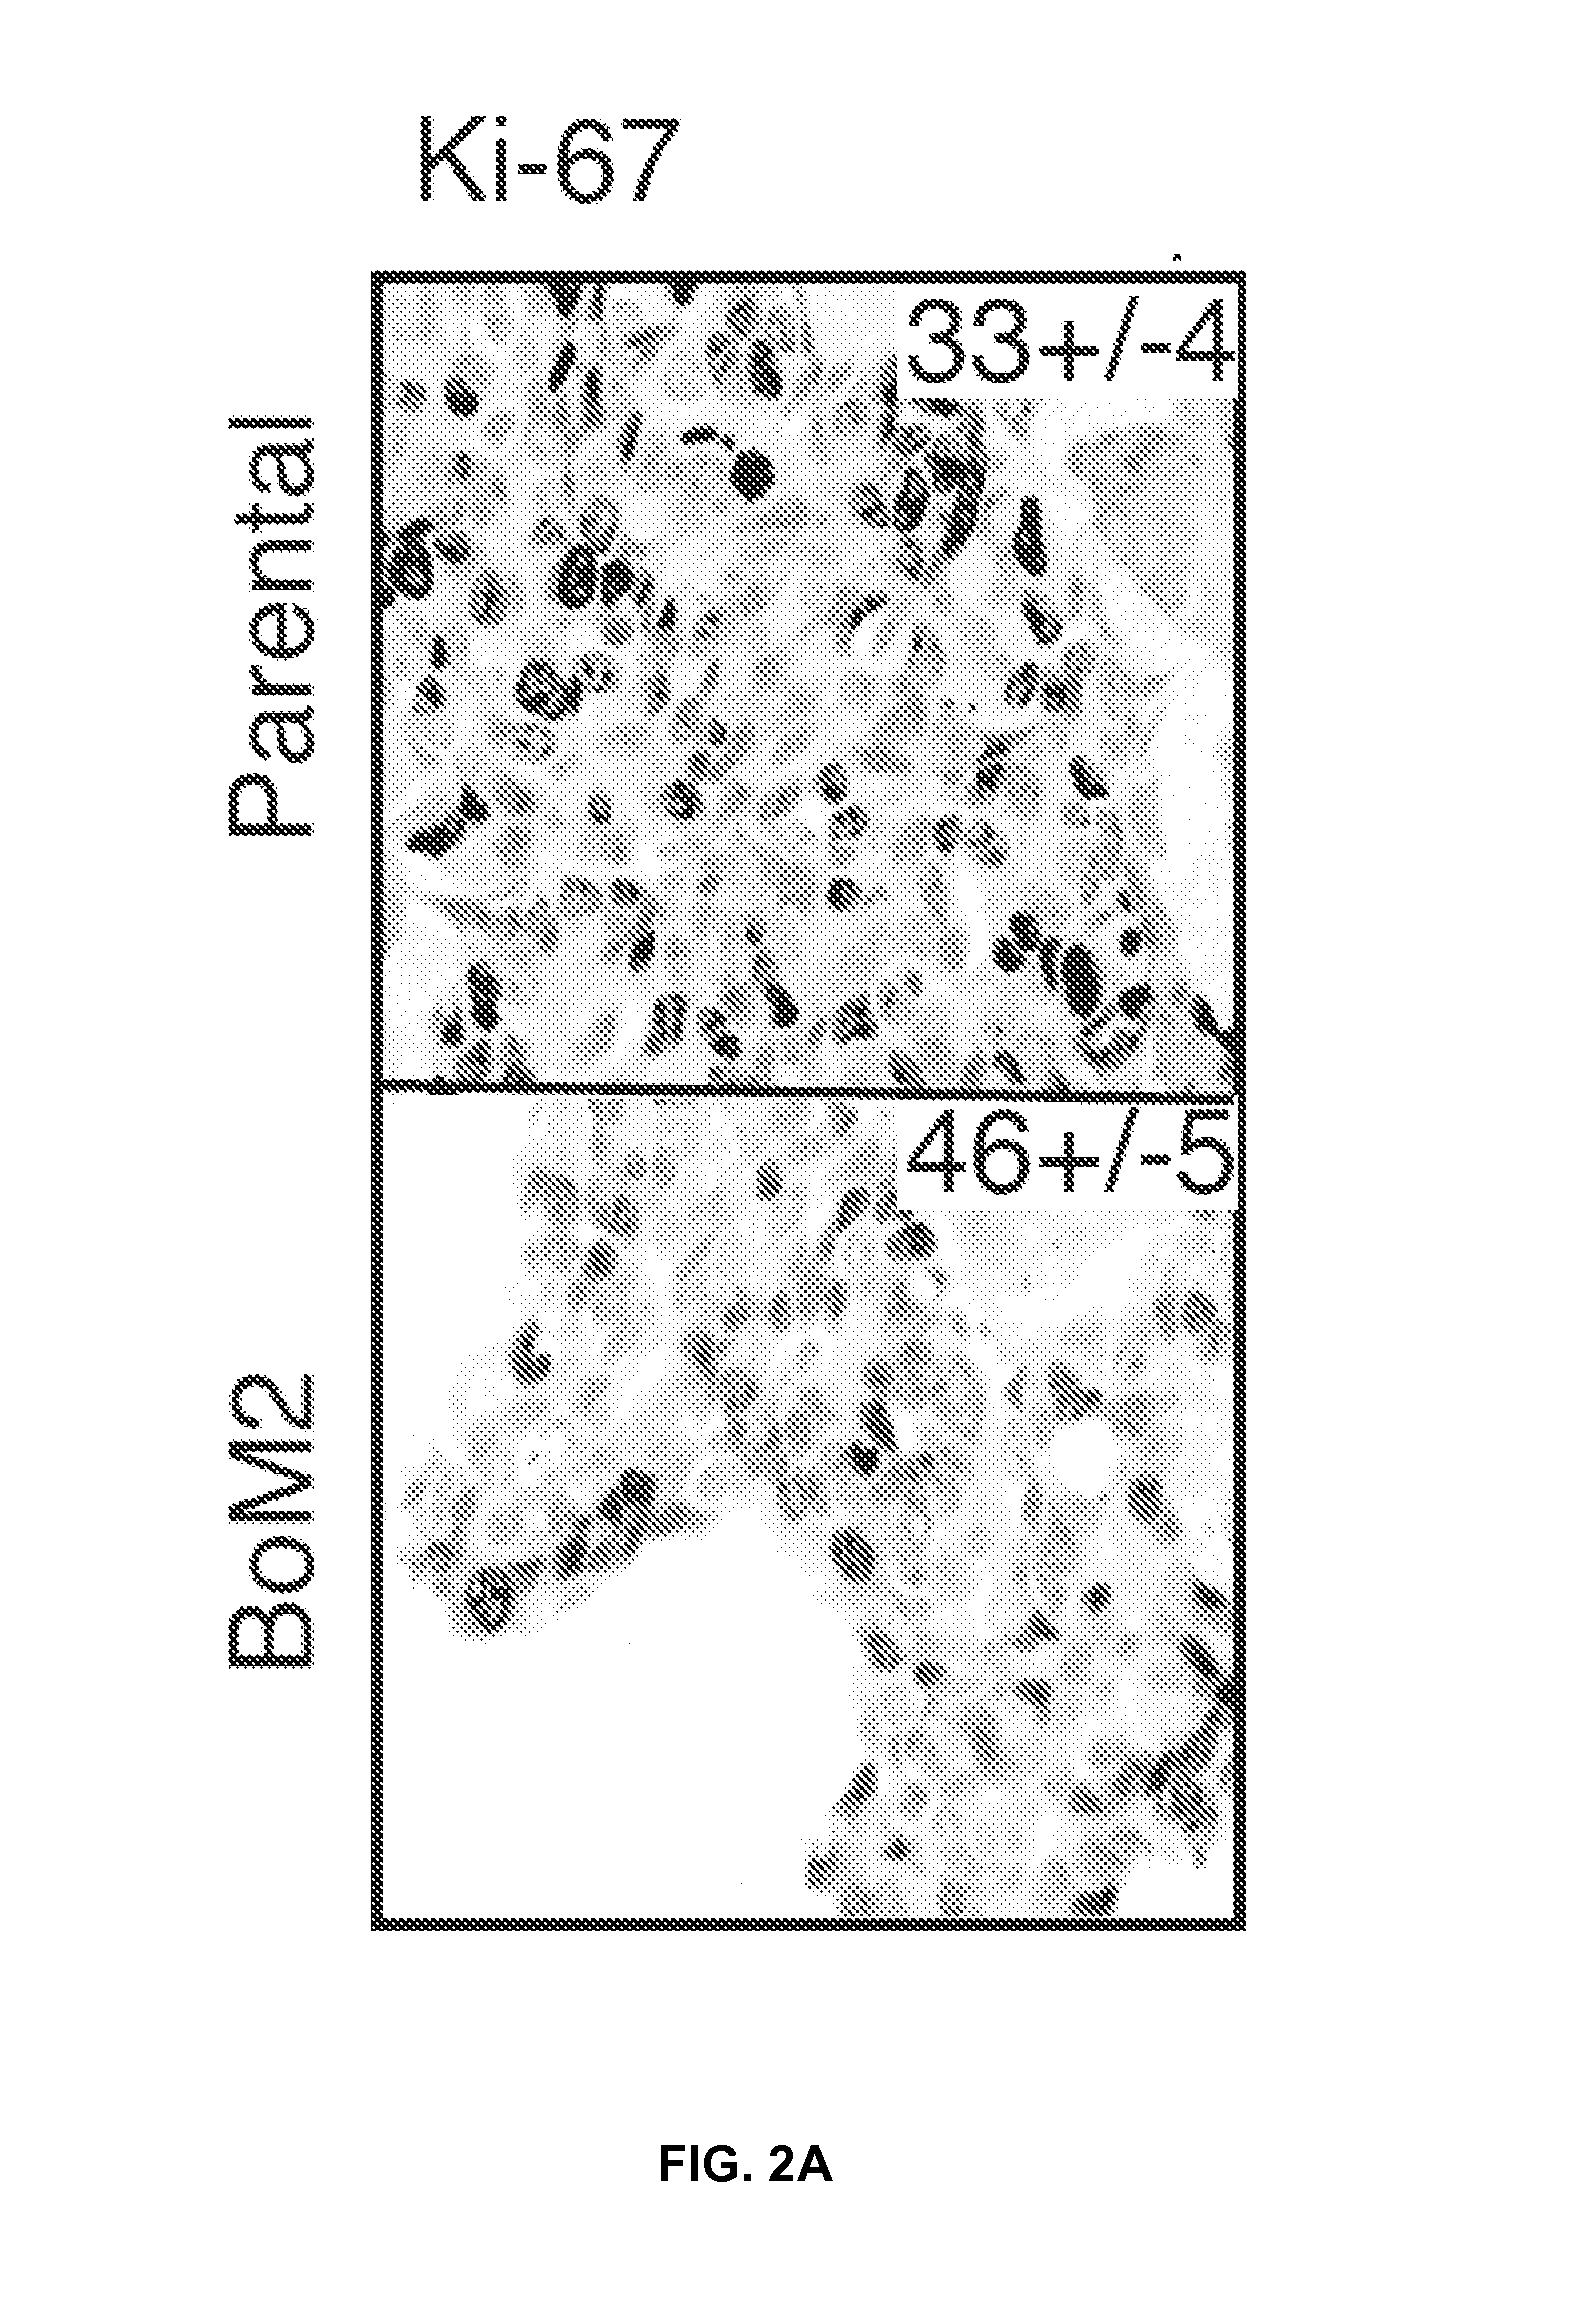 Method for the diagnosis, prognosis, and tratment of cancer metastasis